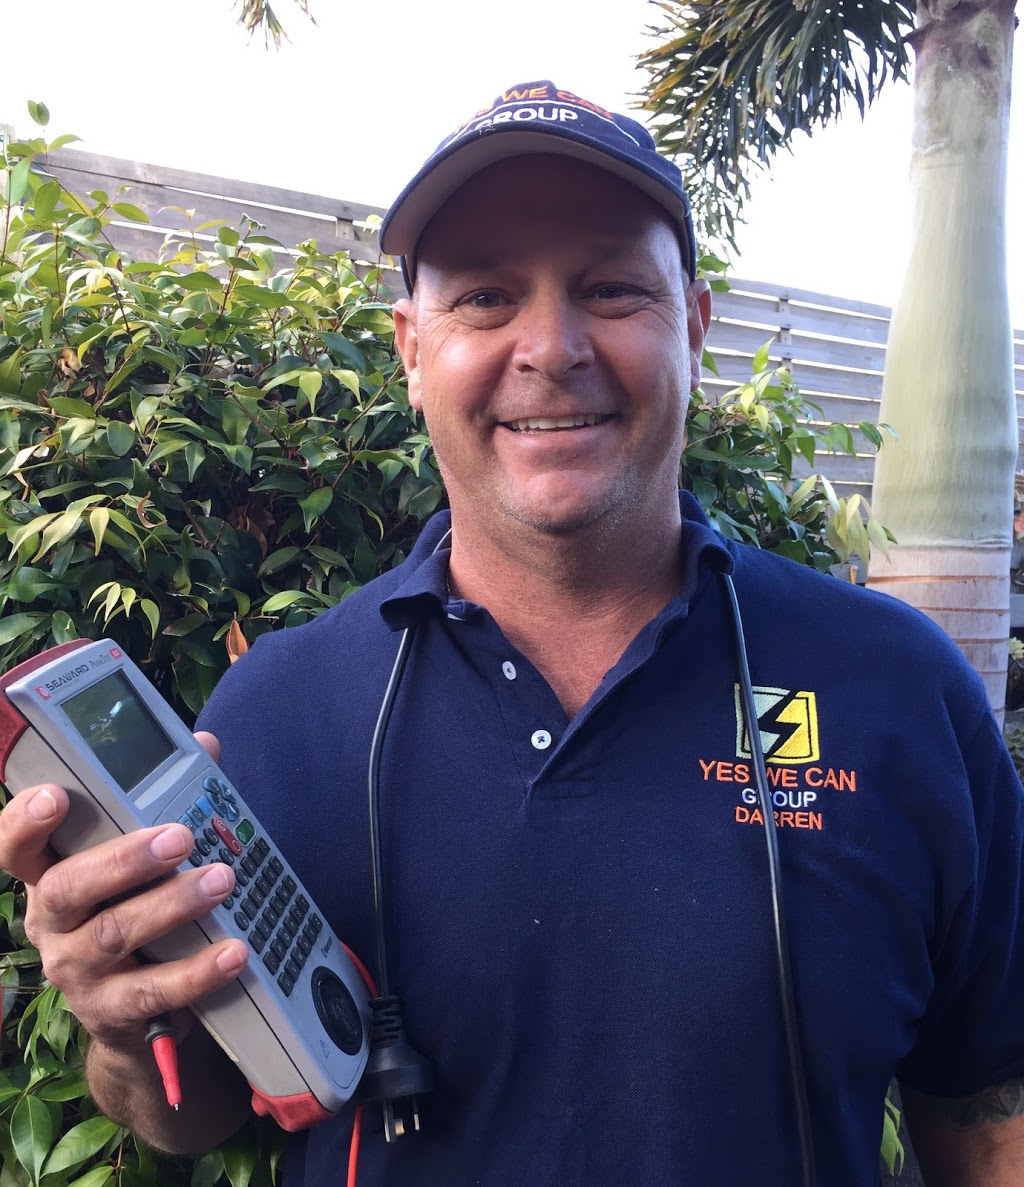 Yes We Can Electrical Test & Tag | 46 May St, Godwin Beach QLD 4511, Australia | Phone: 0423 044 207